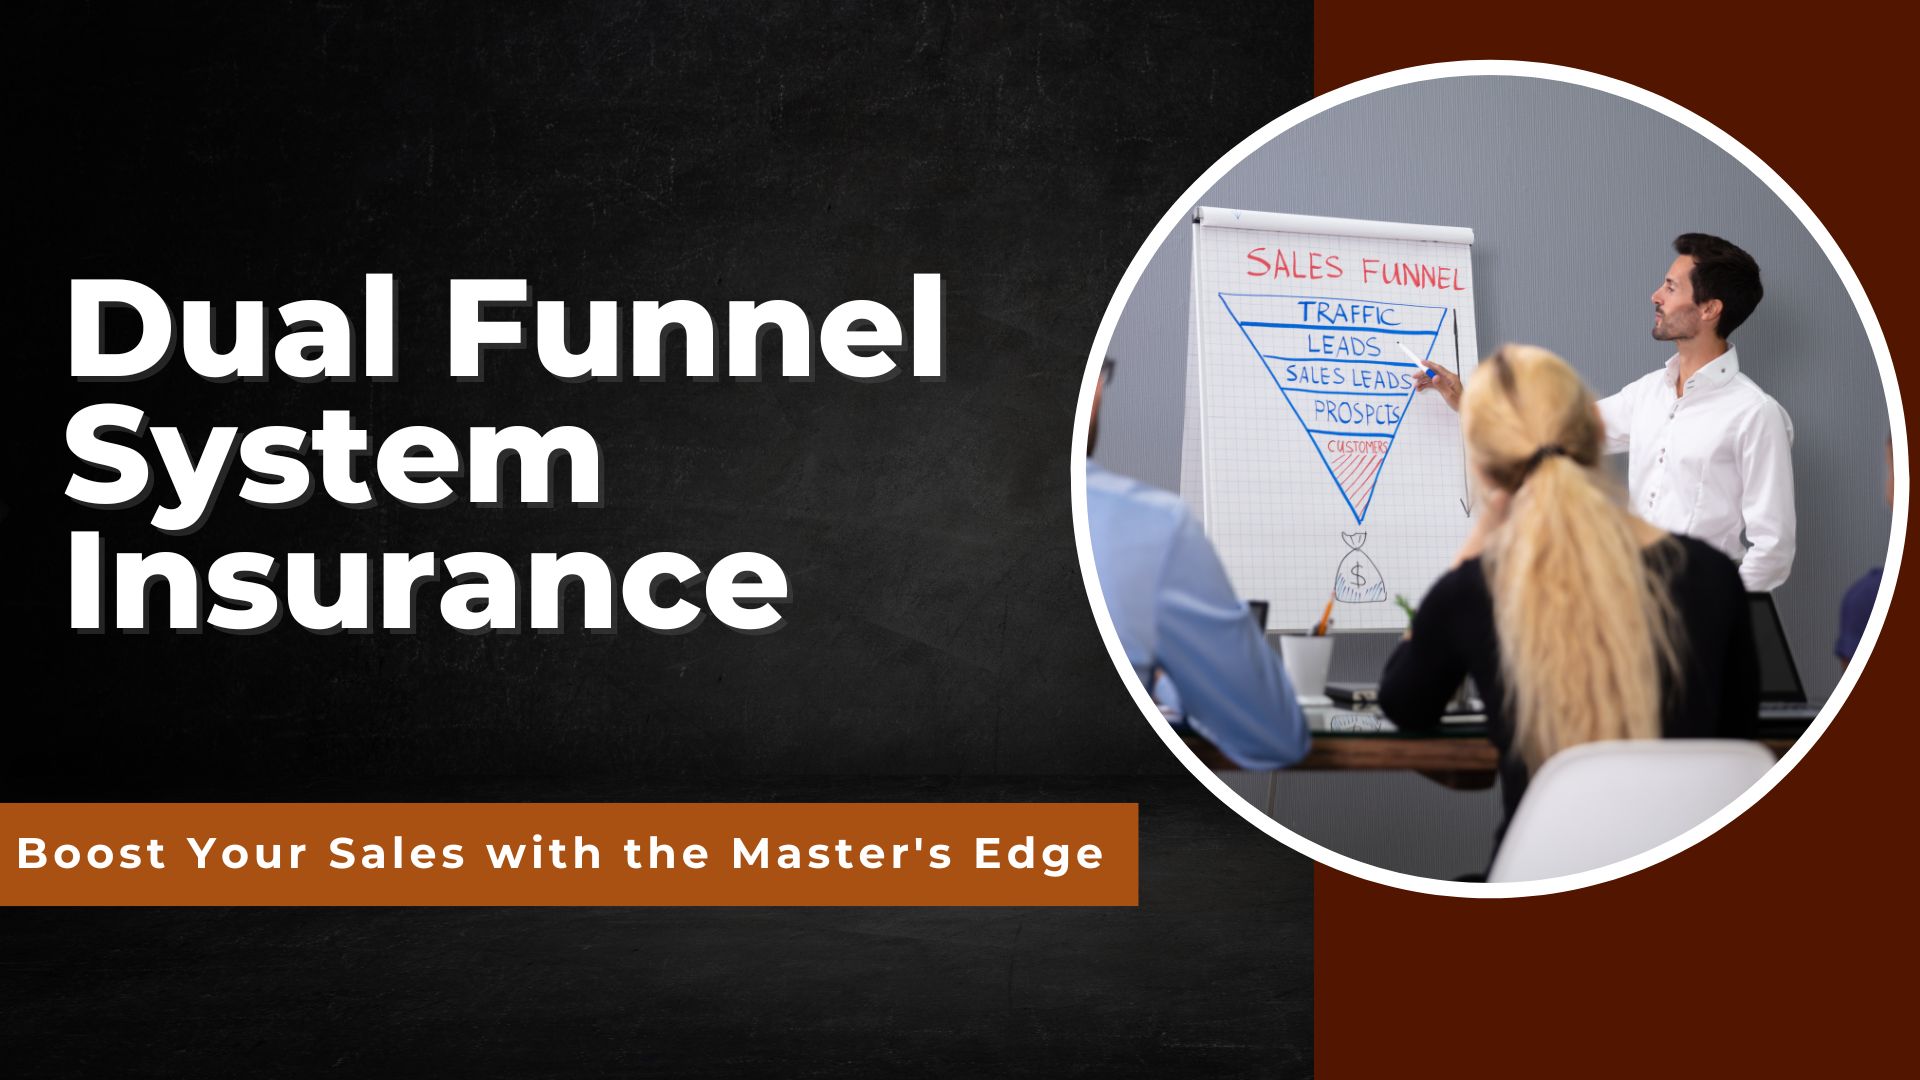 Dual Funnel System Insurance